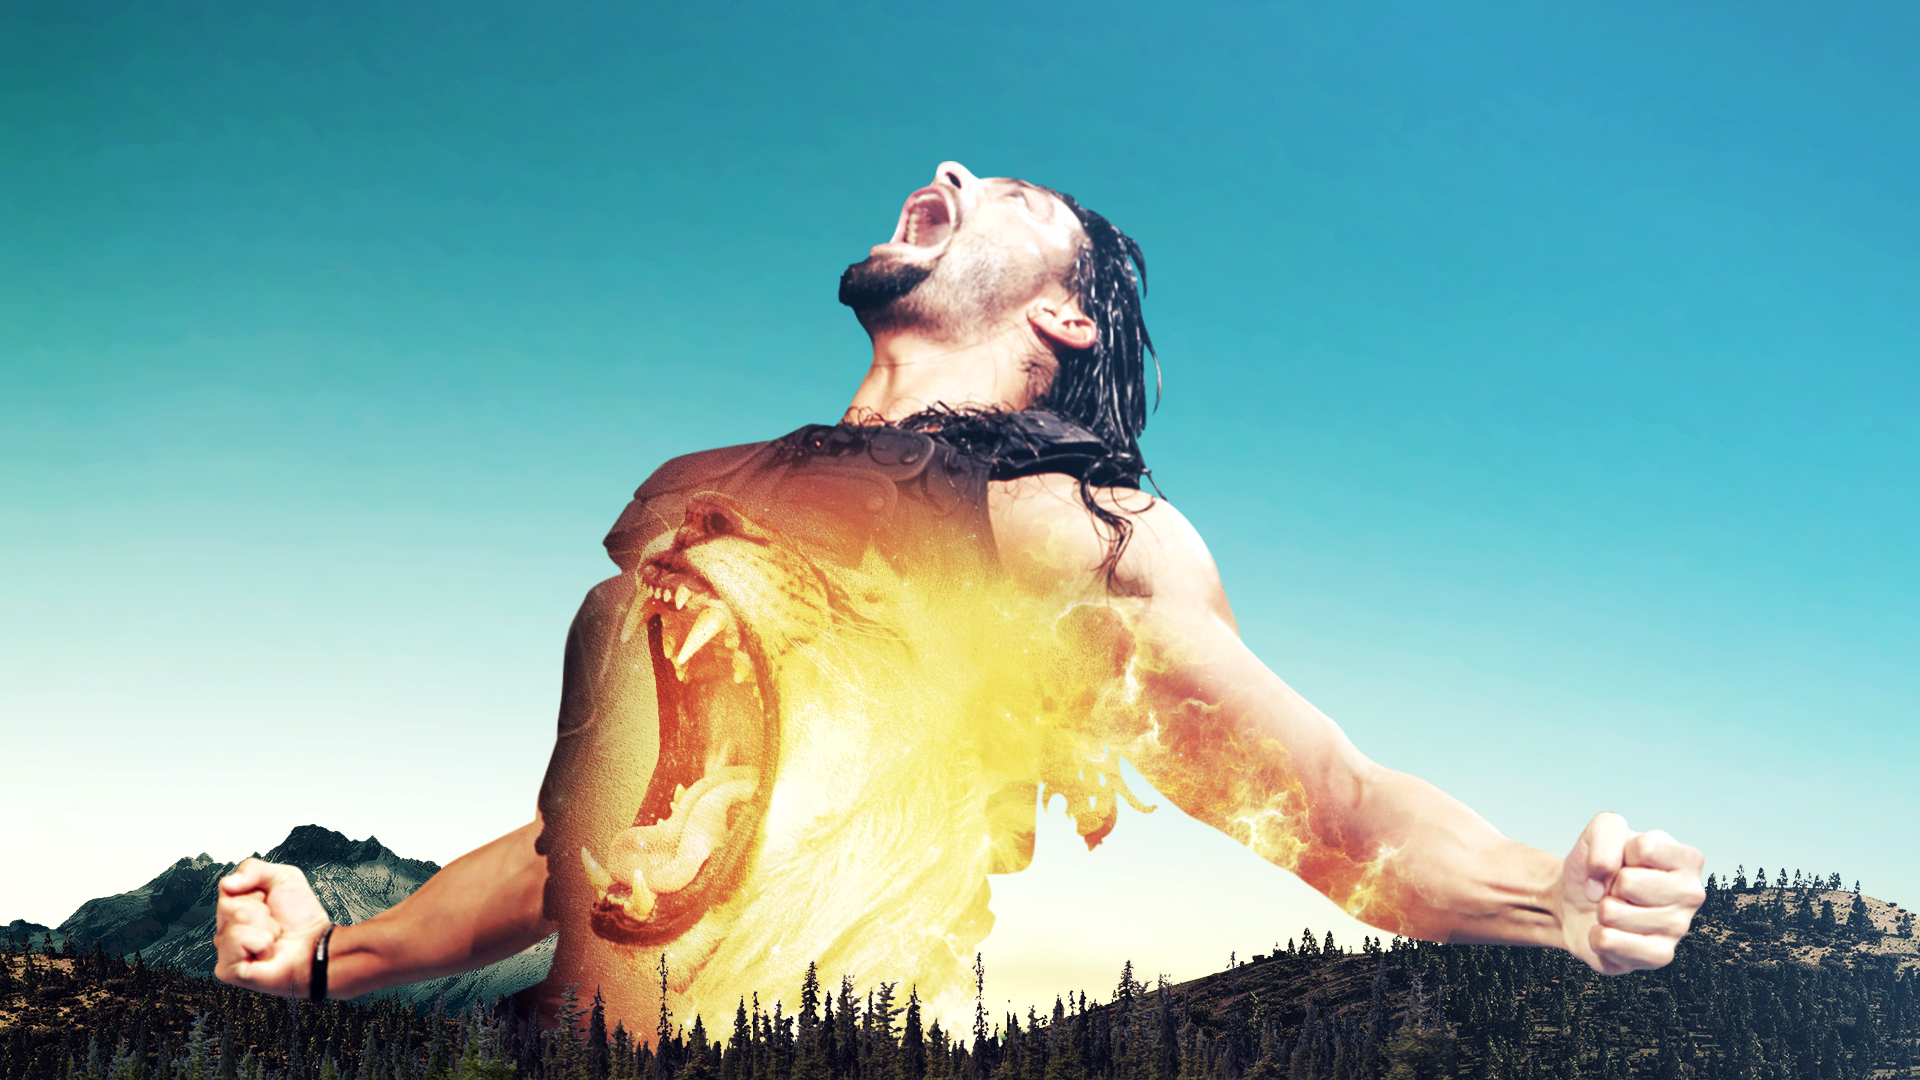 Roman Reigns roar ooh ahh Wallpaper, HD Celebrities 4K Wallpapers, Images,  Photos and Background - Wallpapers Den